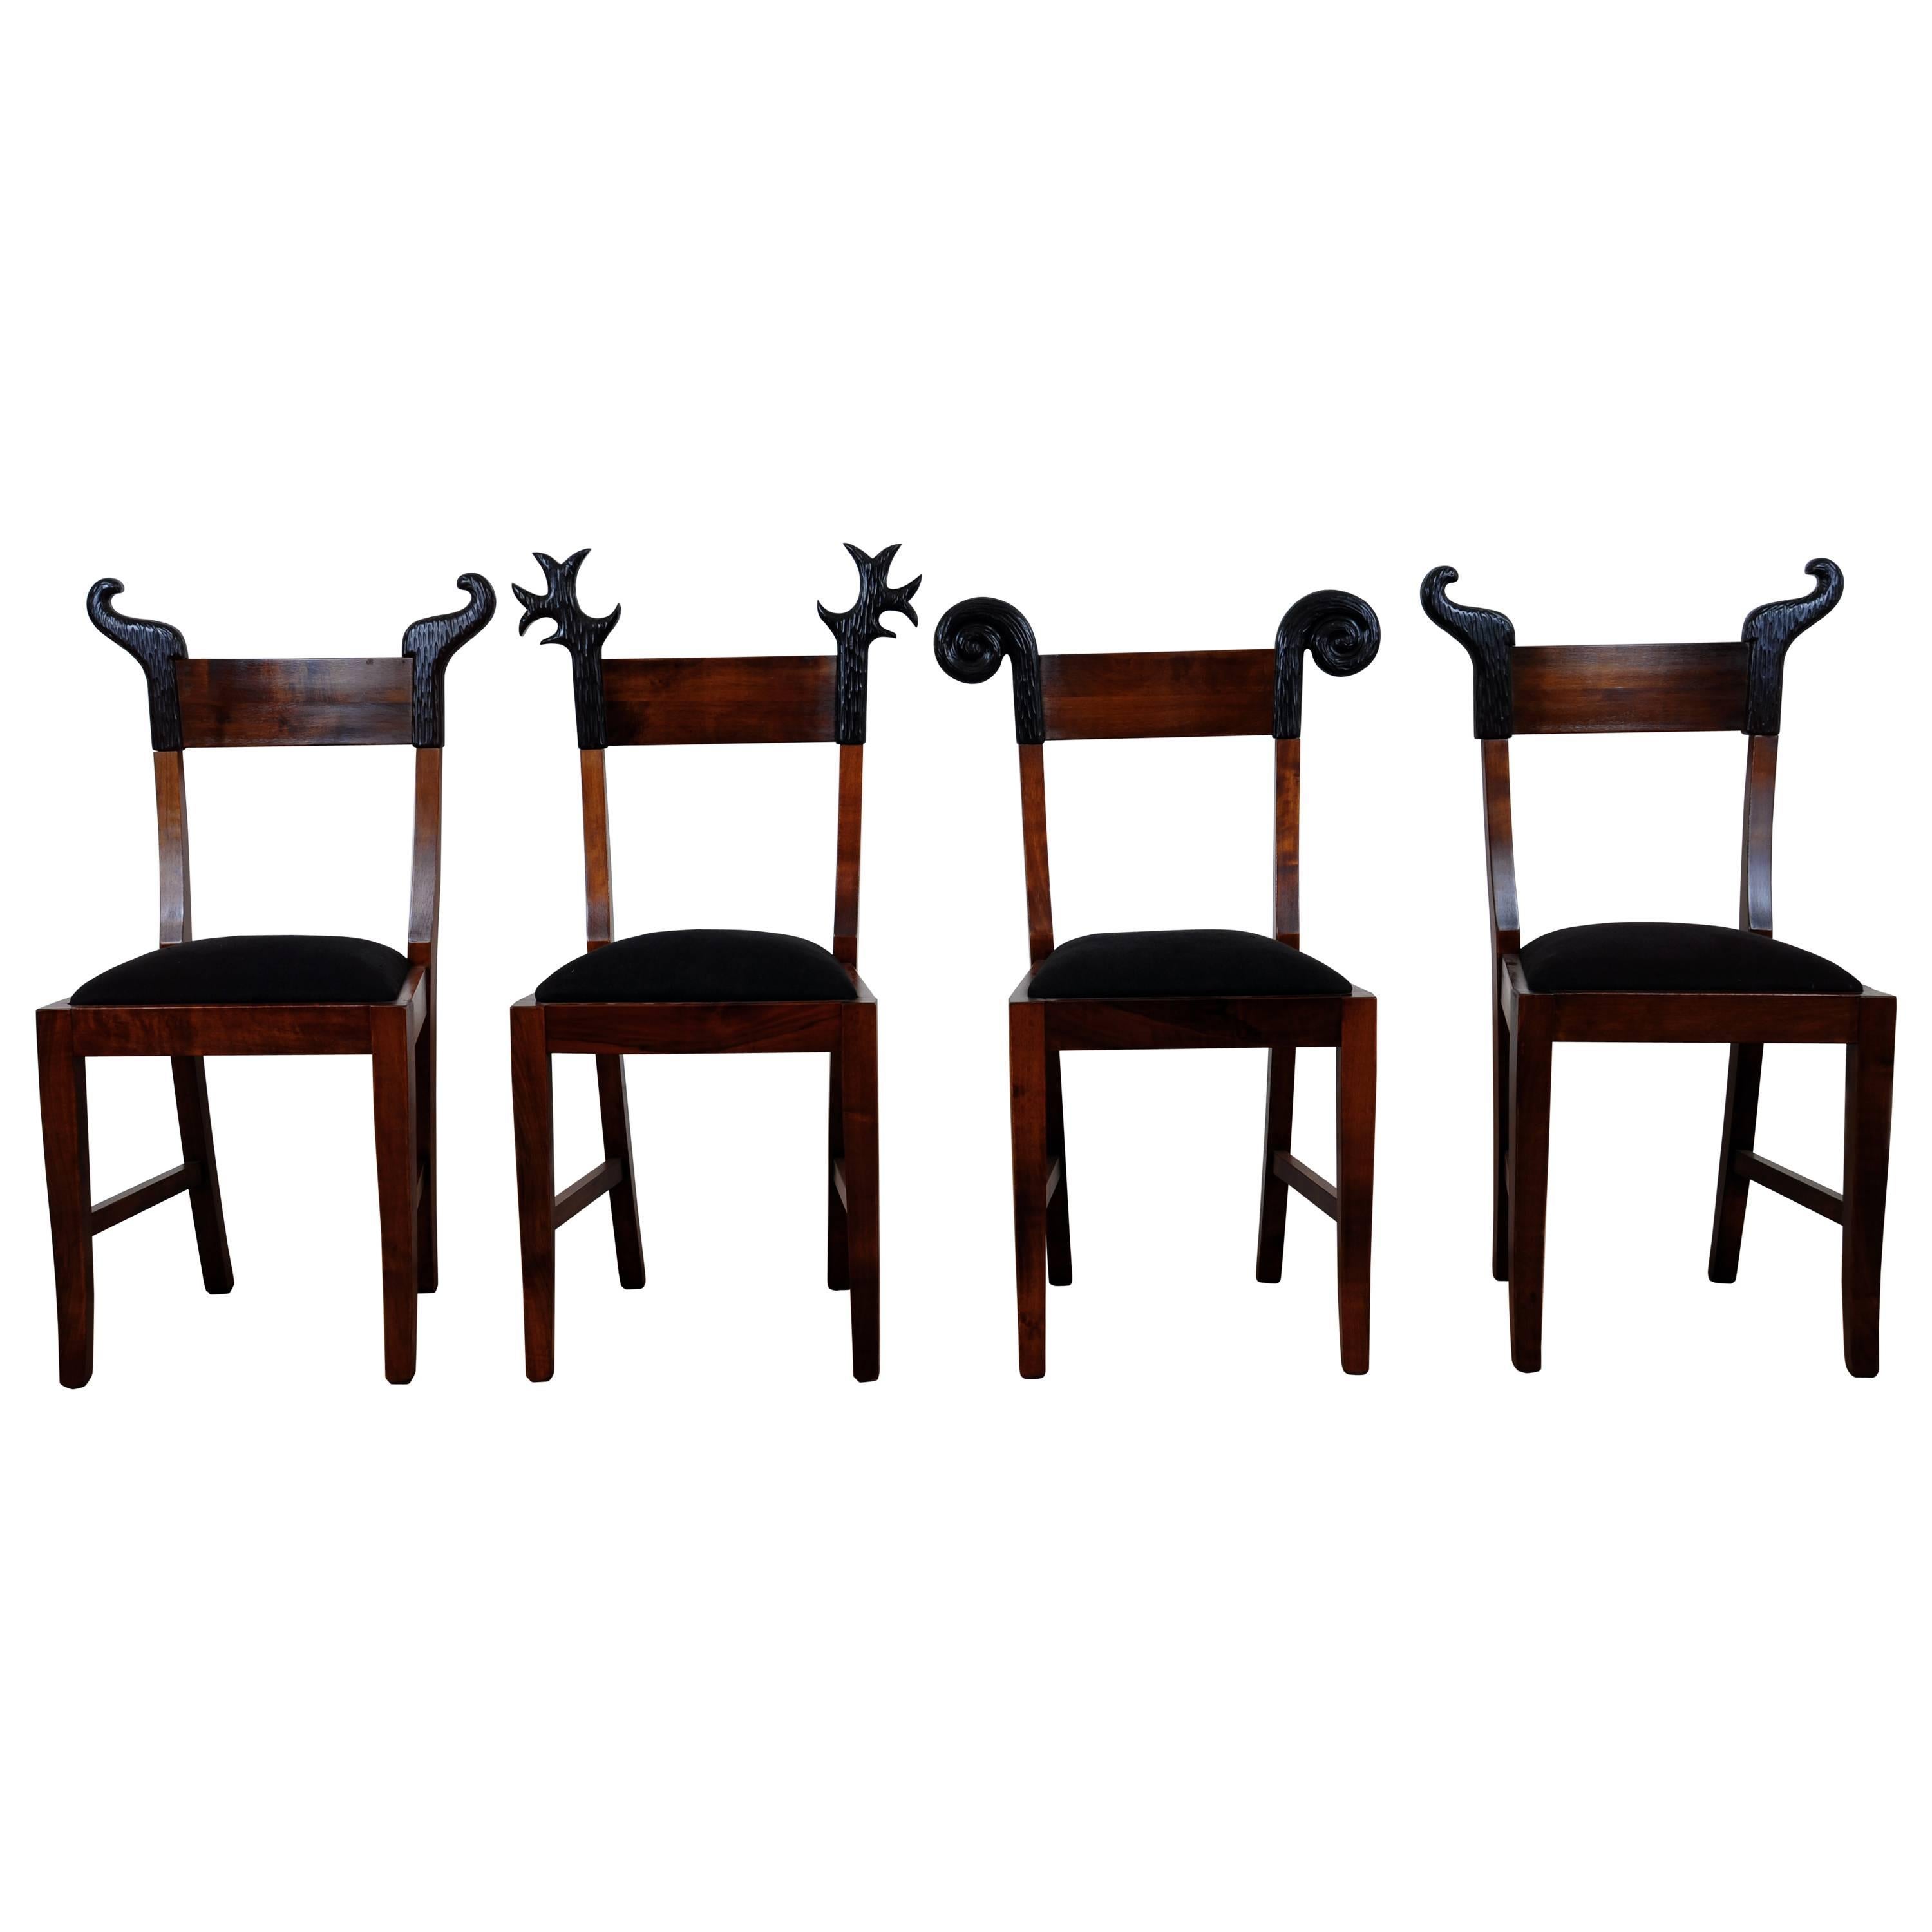 Set of Four Black Forest Wood Chairs by Michelangeli, Italy For Sale